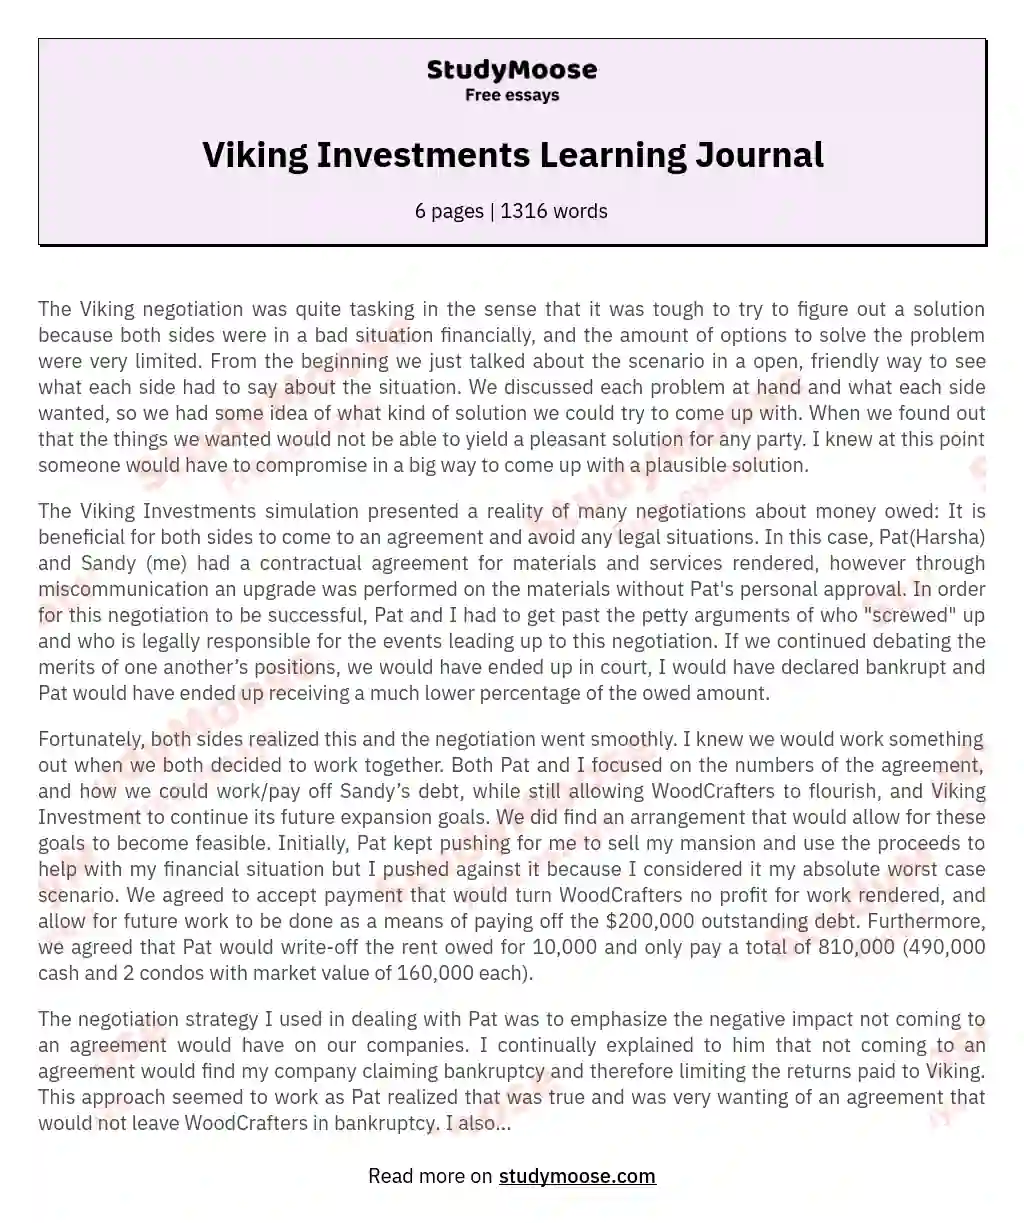 Viking Investments Learning Journal essay